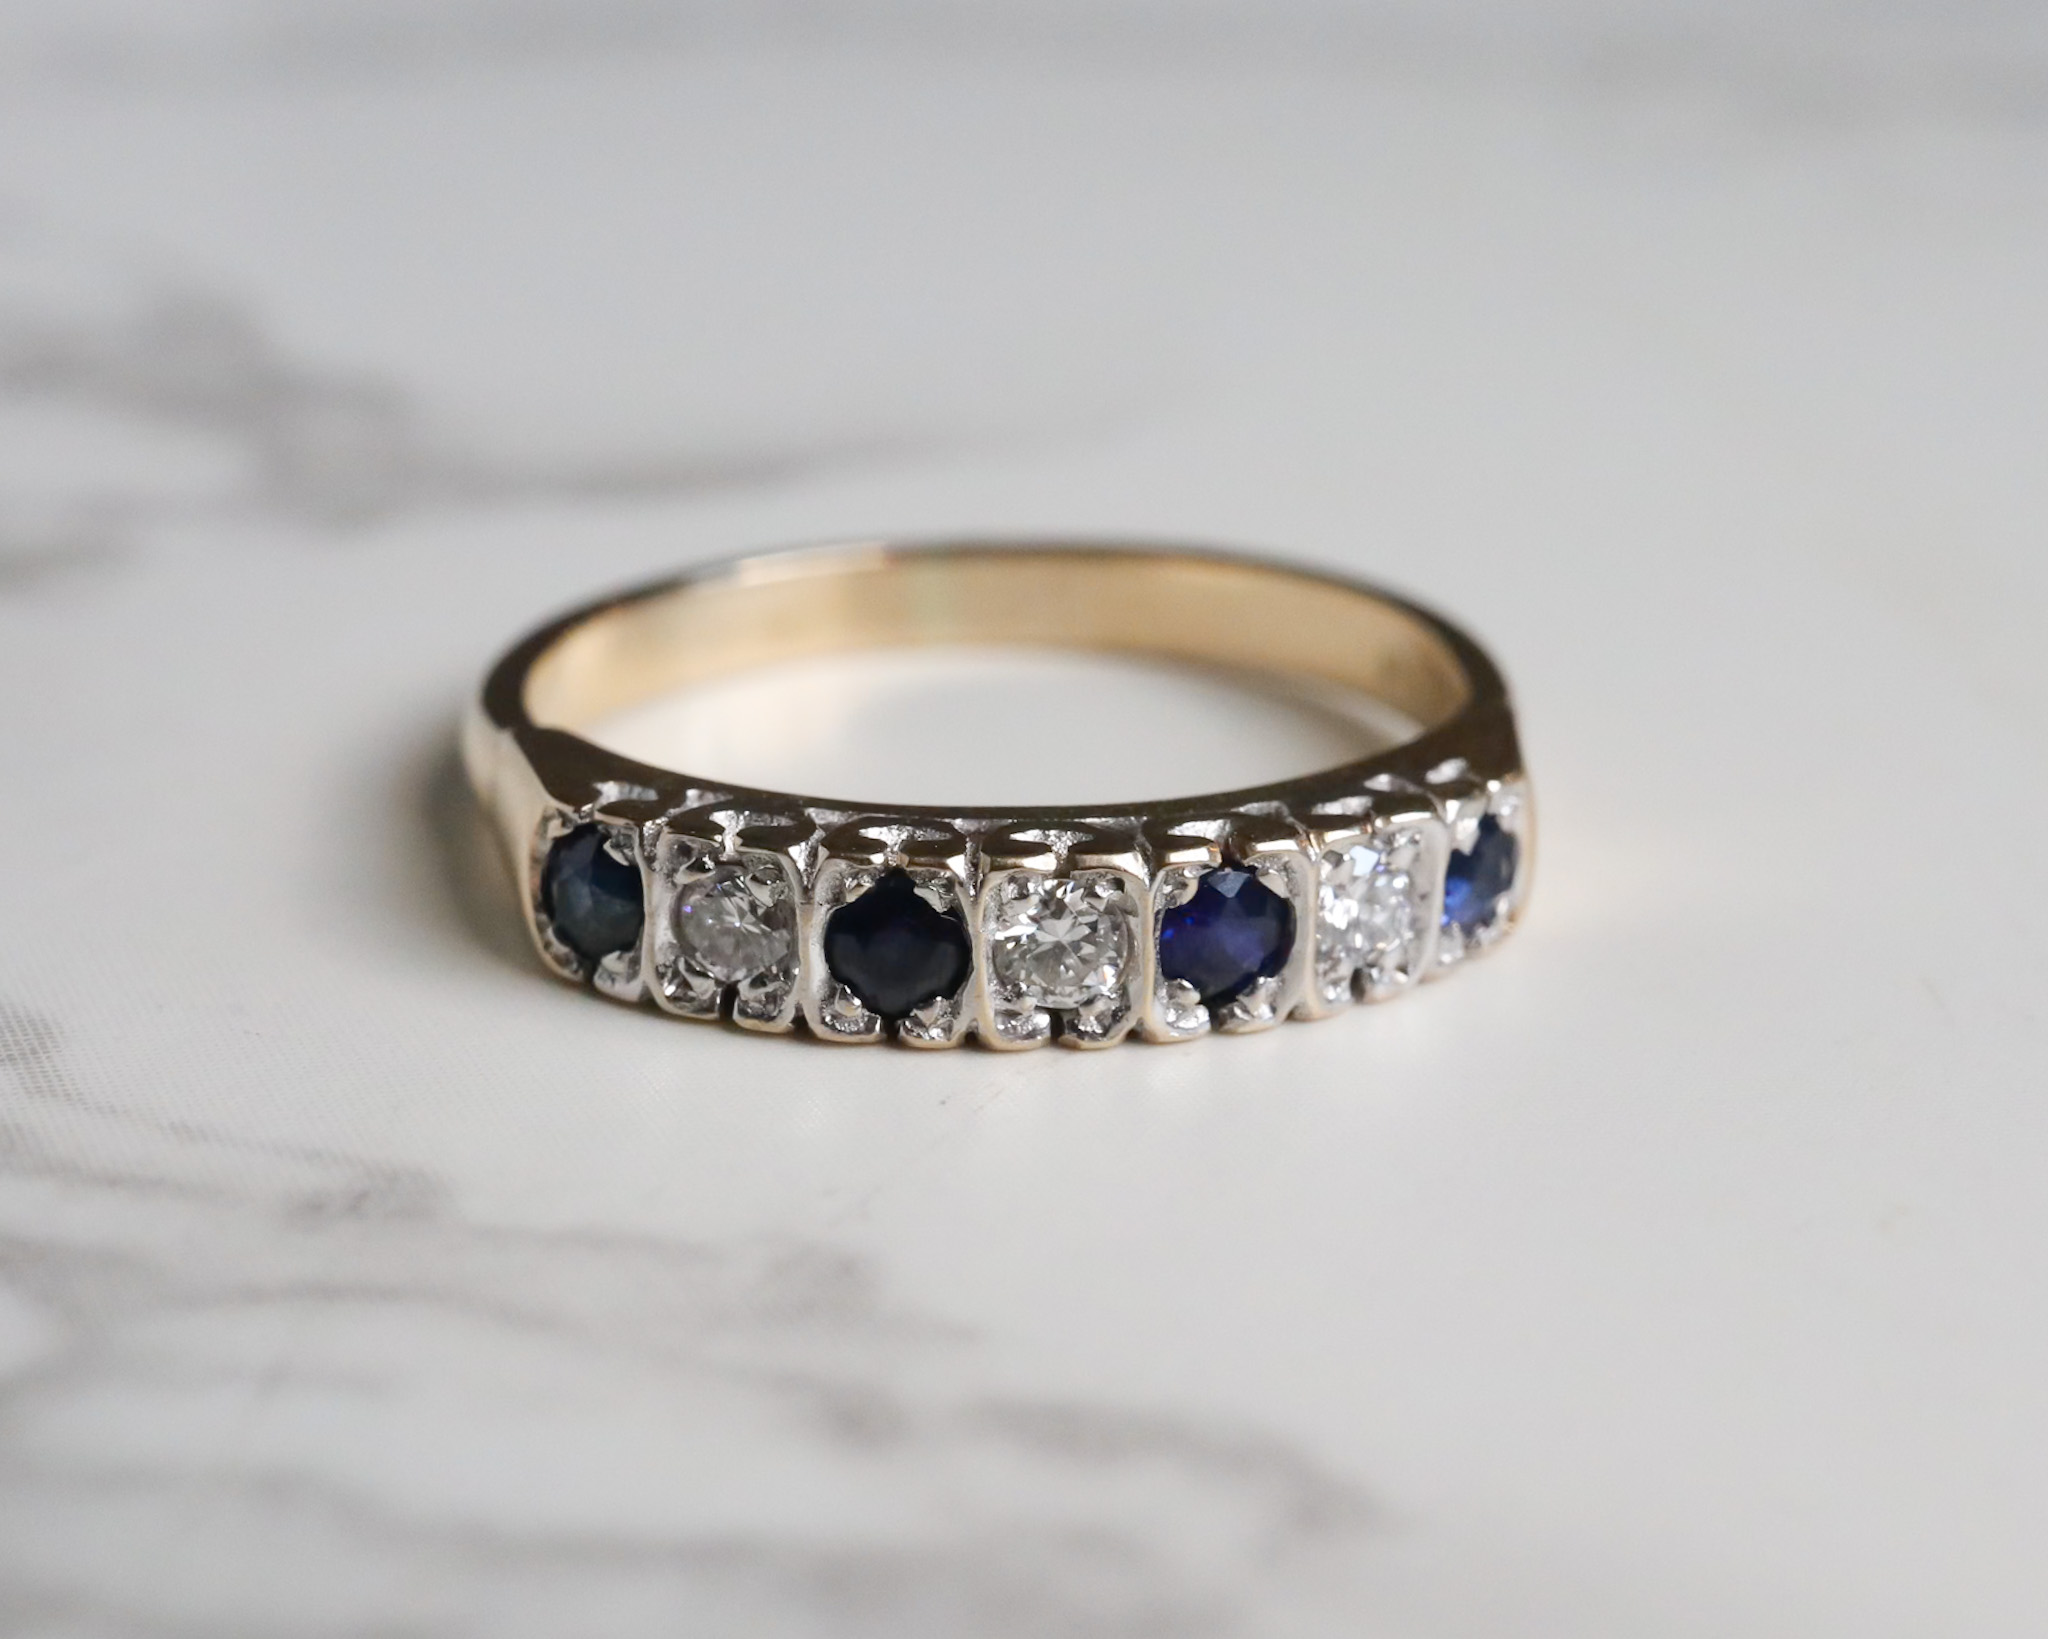 Vintage sapphire and diamond seven stone ring for sale in Leeds, Yorkshire